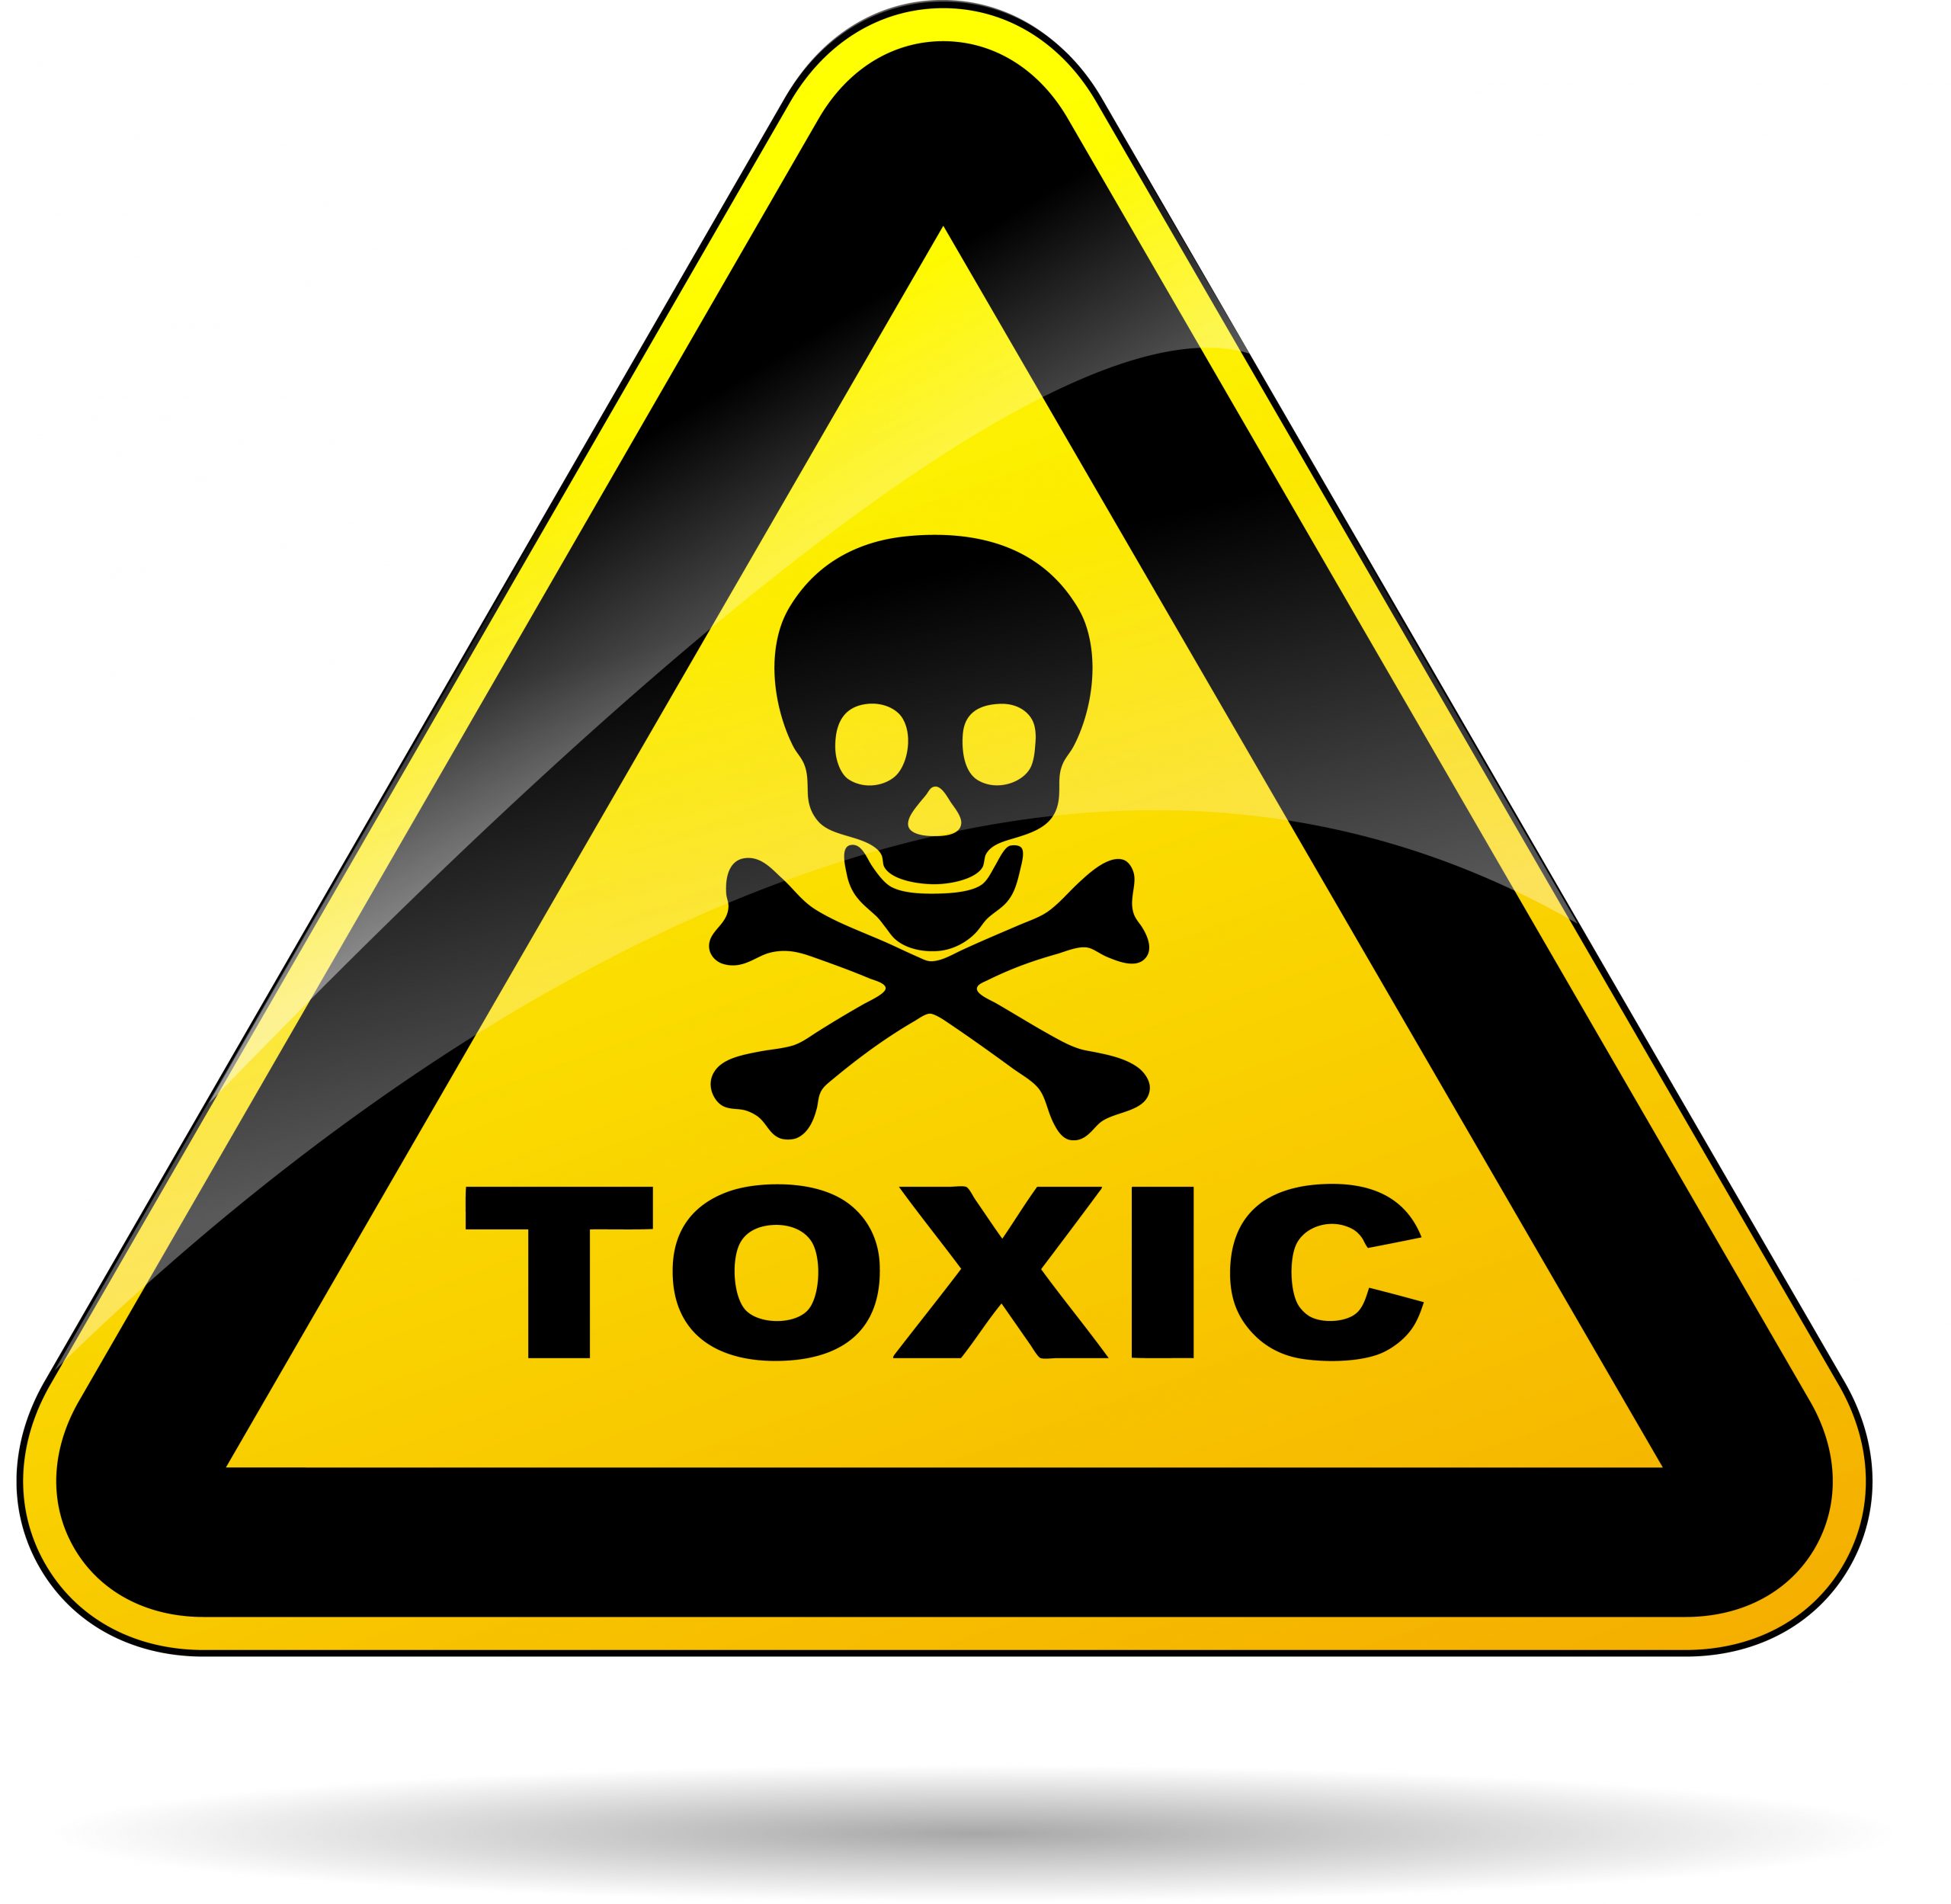 Fluoride Officially Classified as a NEUROTOXIN in The Lancet